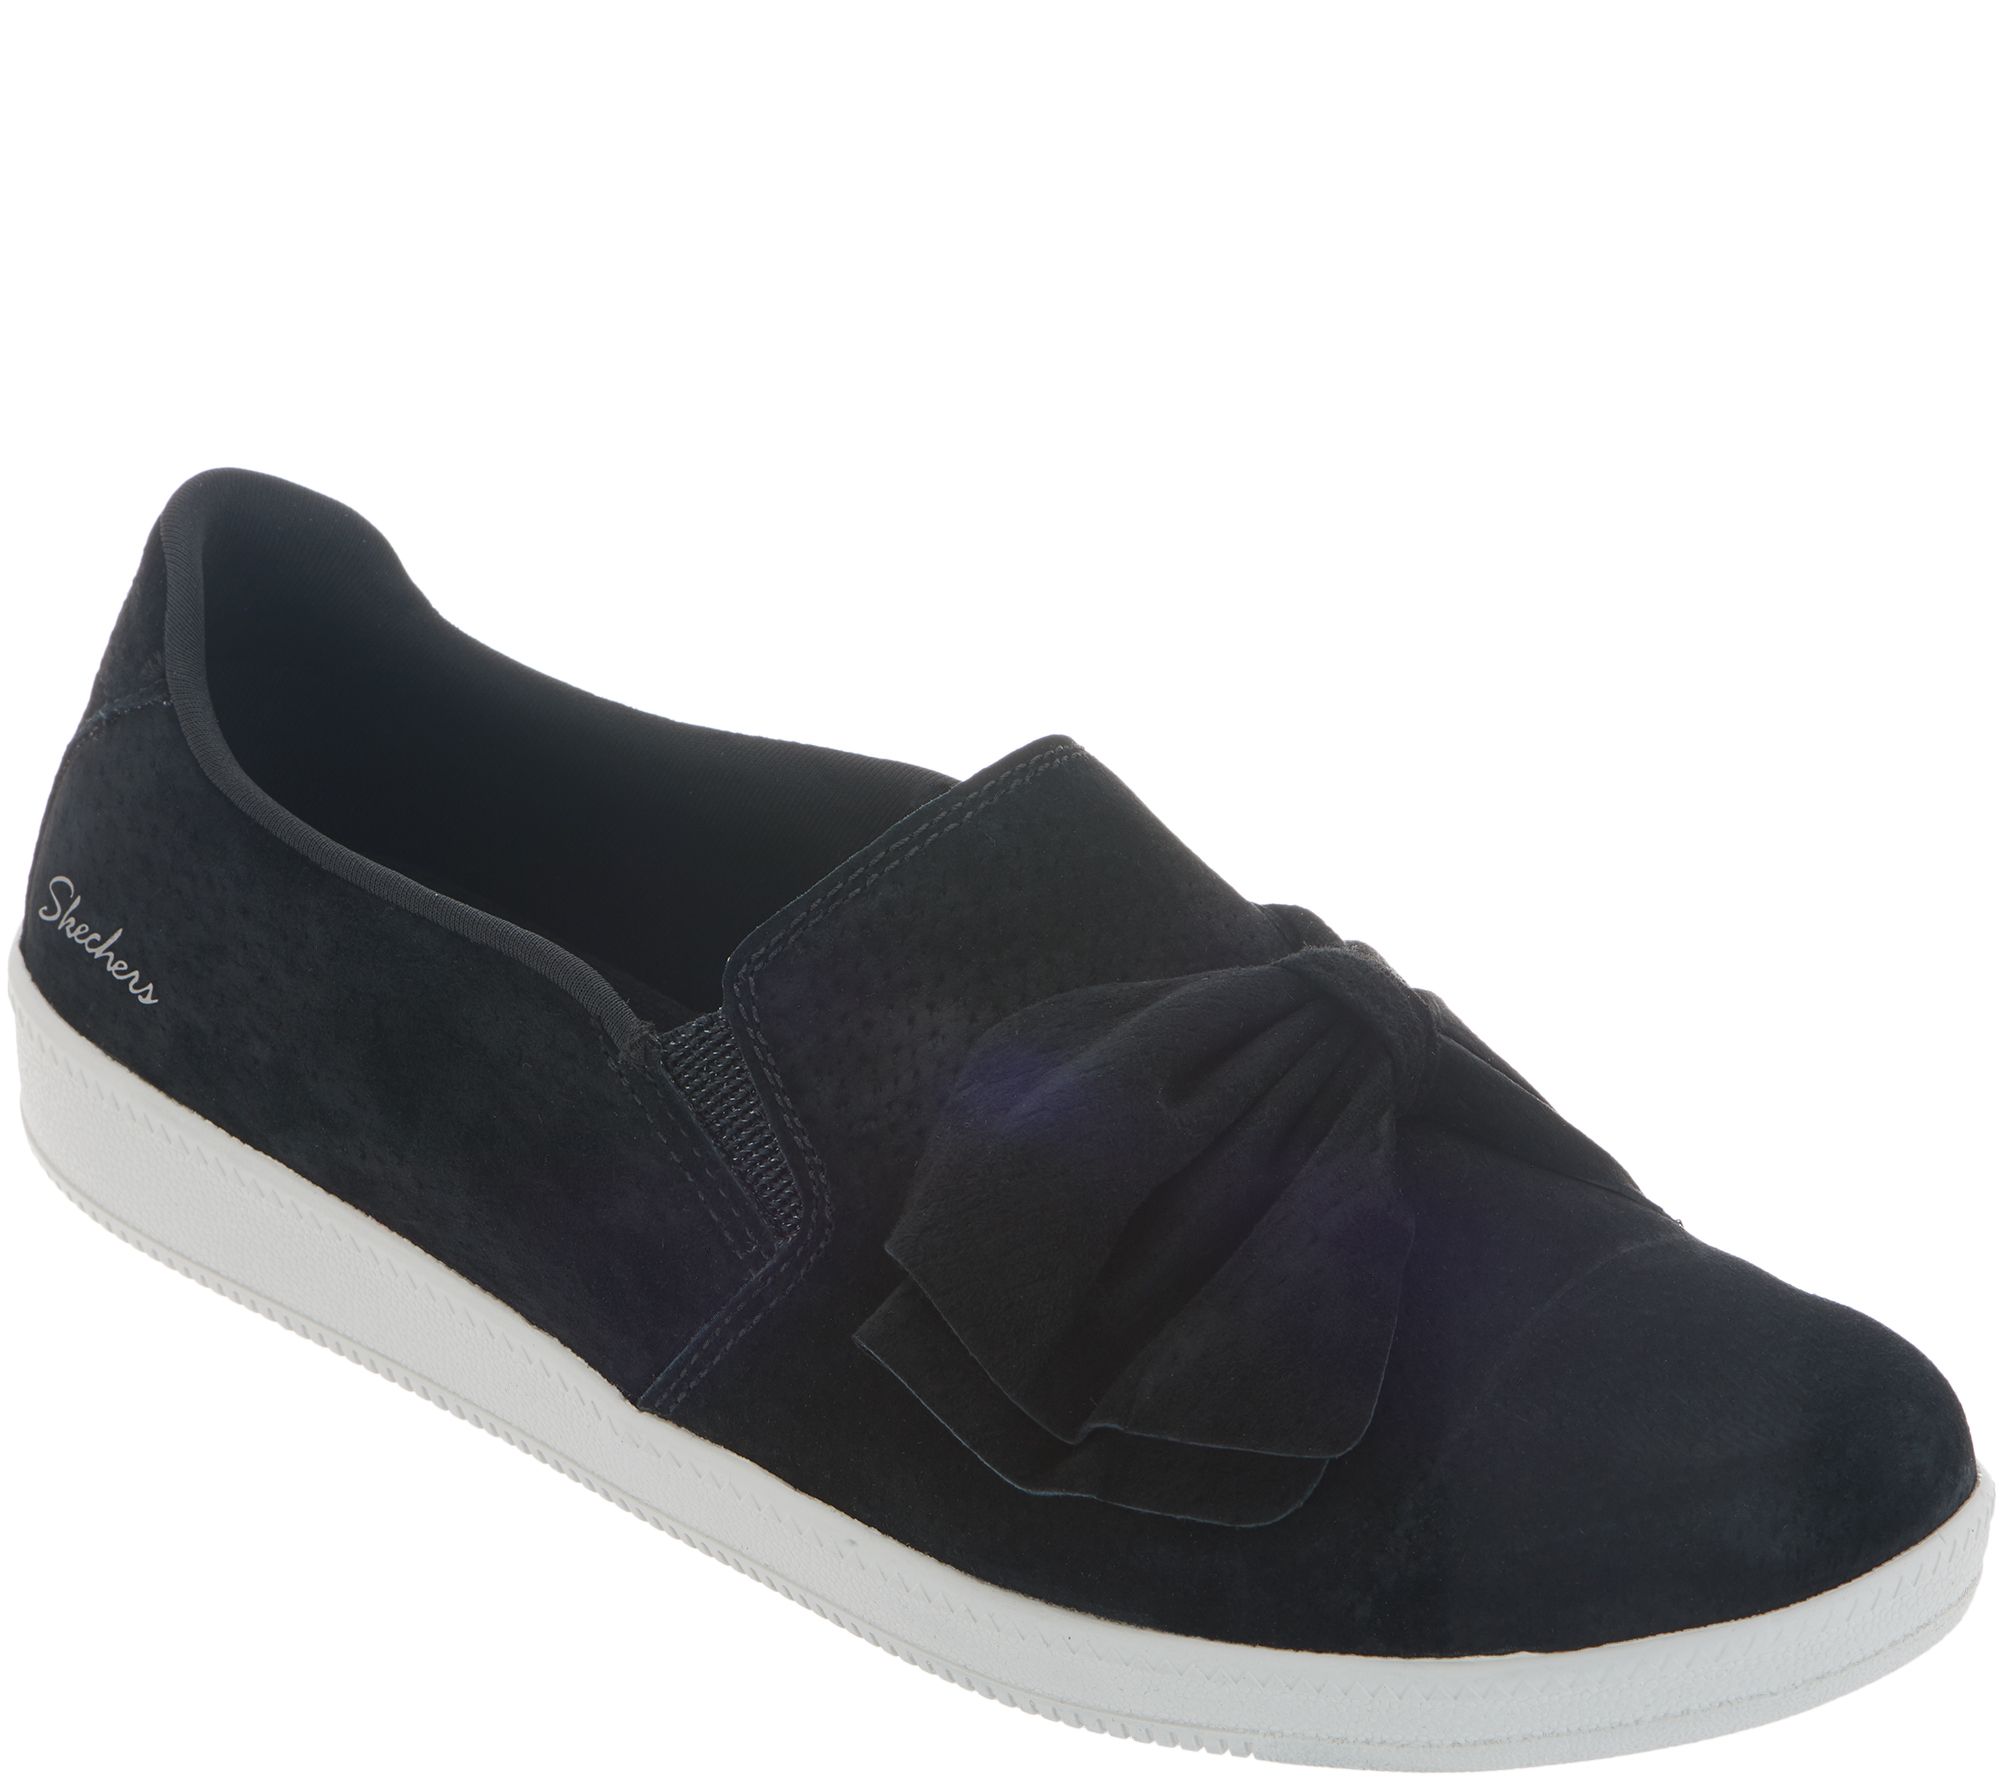 skechers madison ave suede